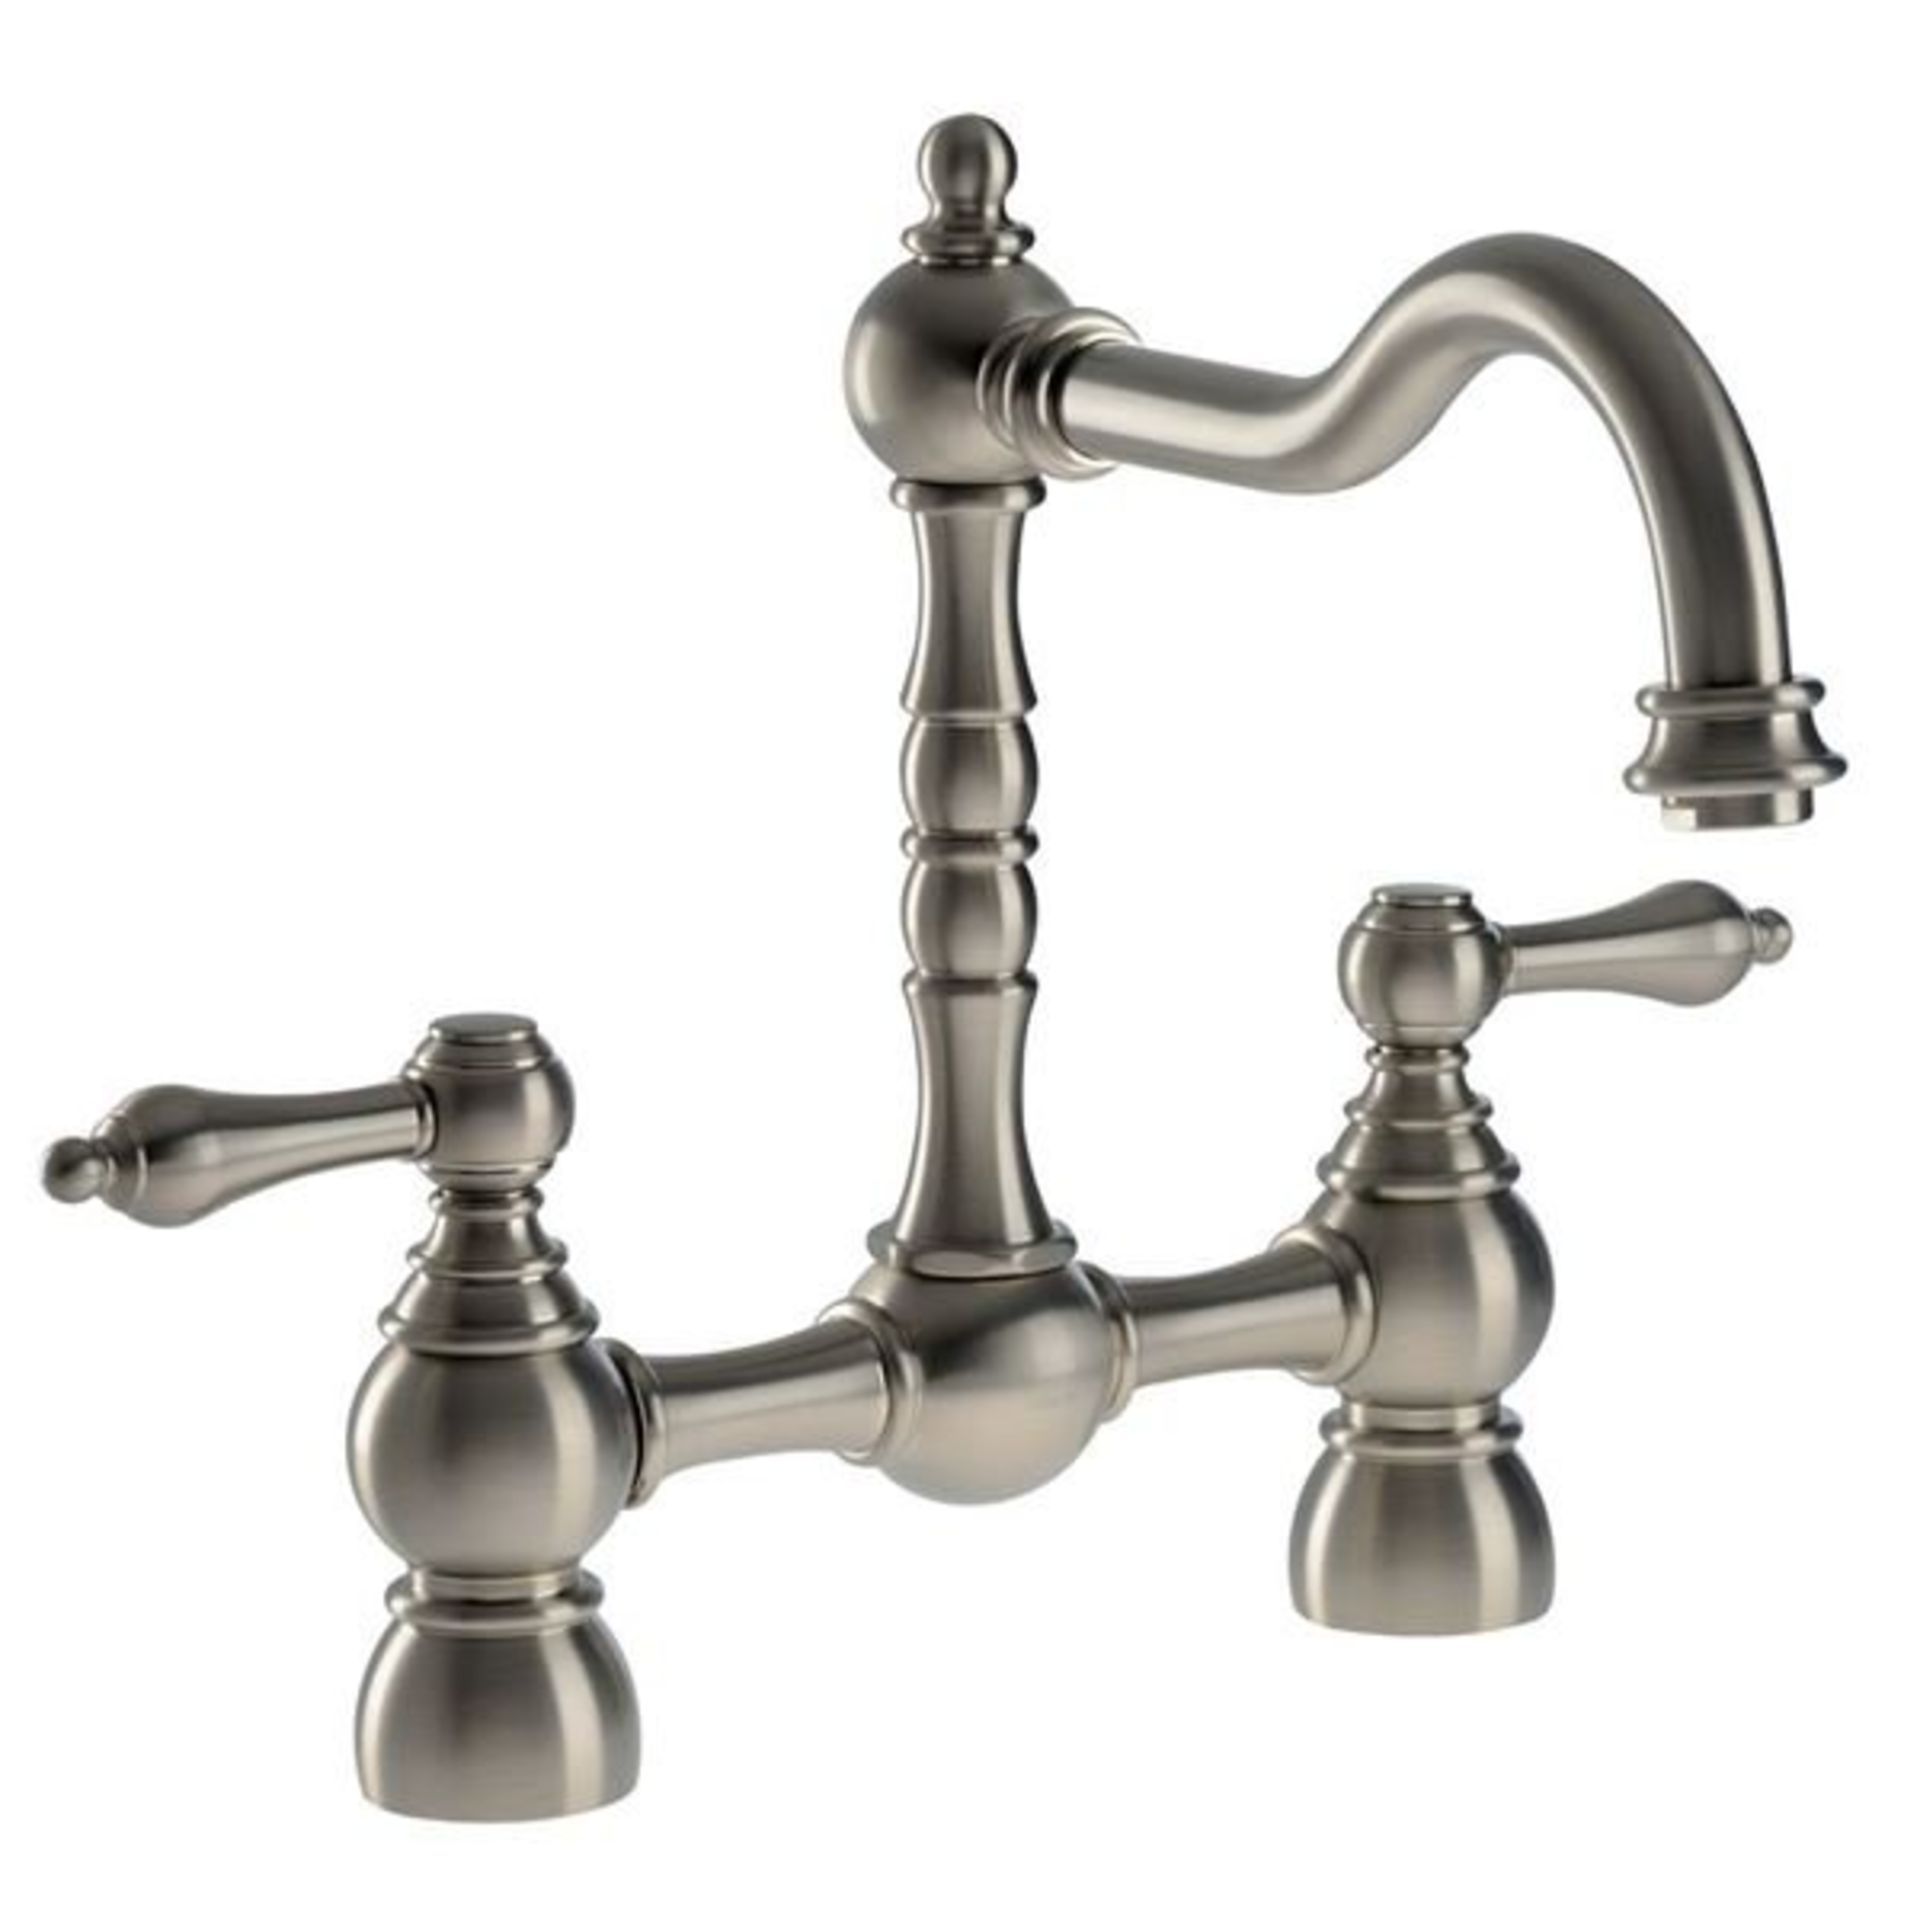 New (Aa94) Abode Bayenne Bridge Mixer Tap. RRP £406. Product Features The Abode At3034 Bayen... - Image 2 of 2